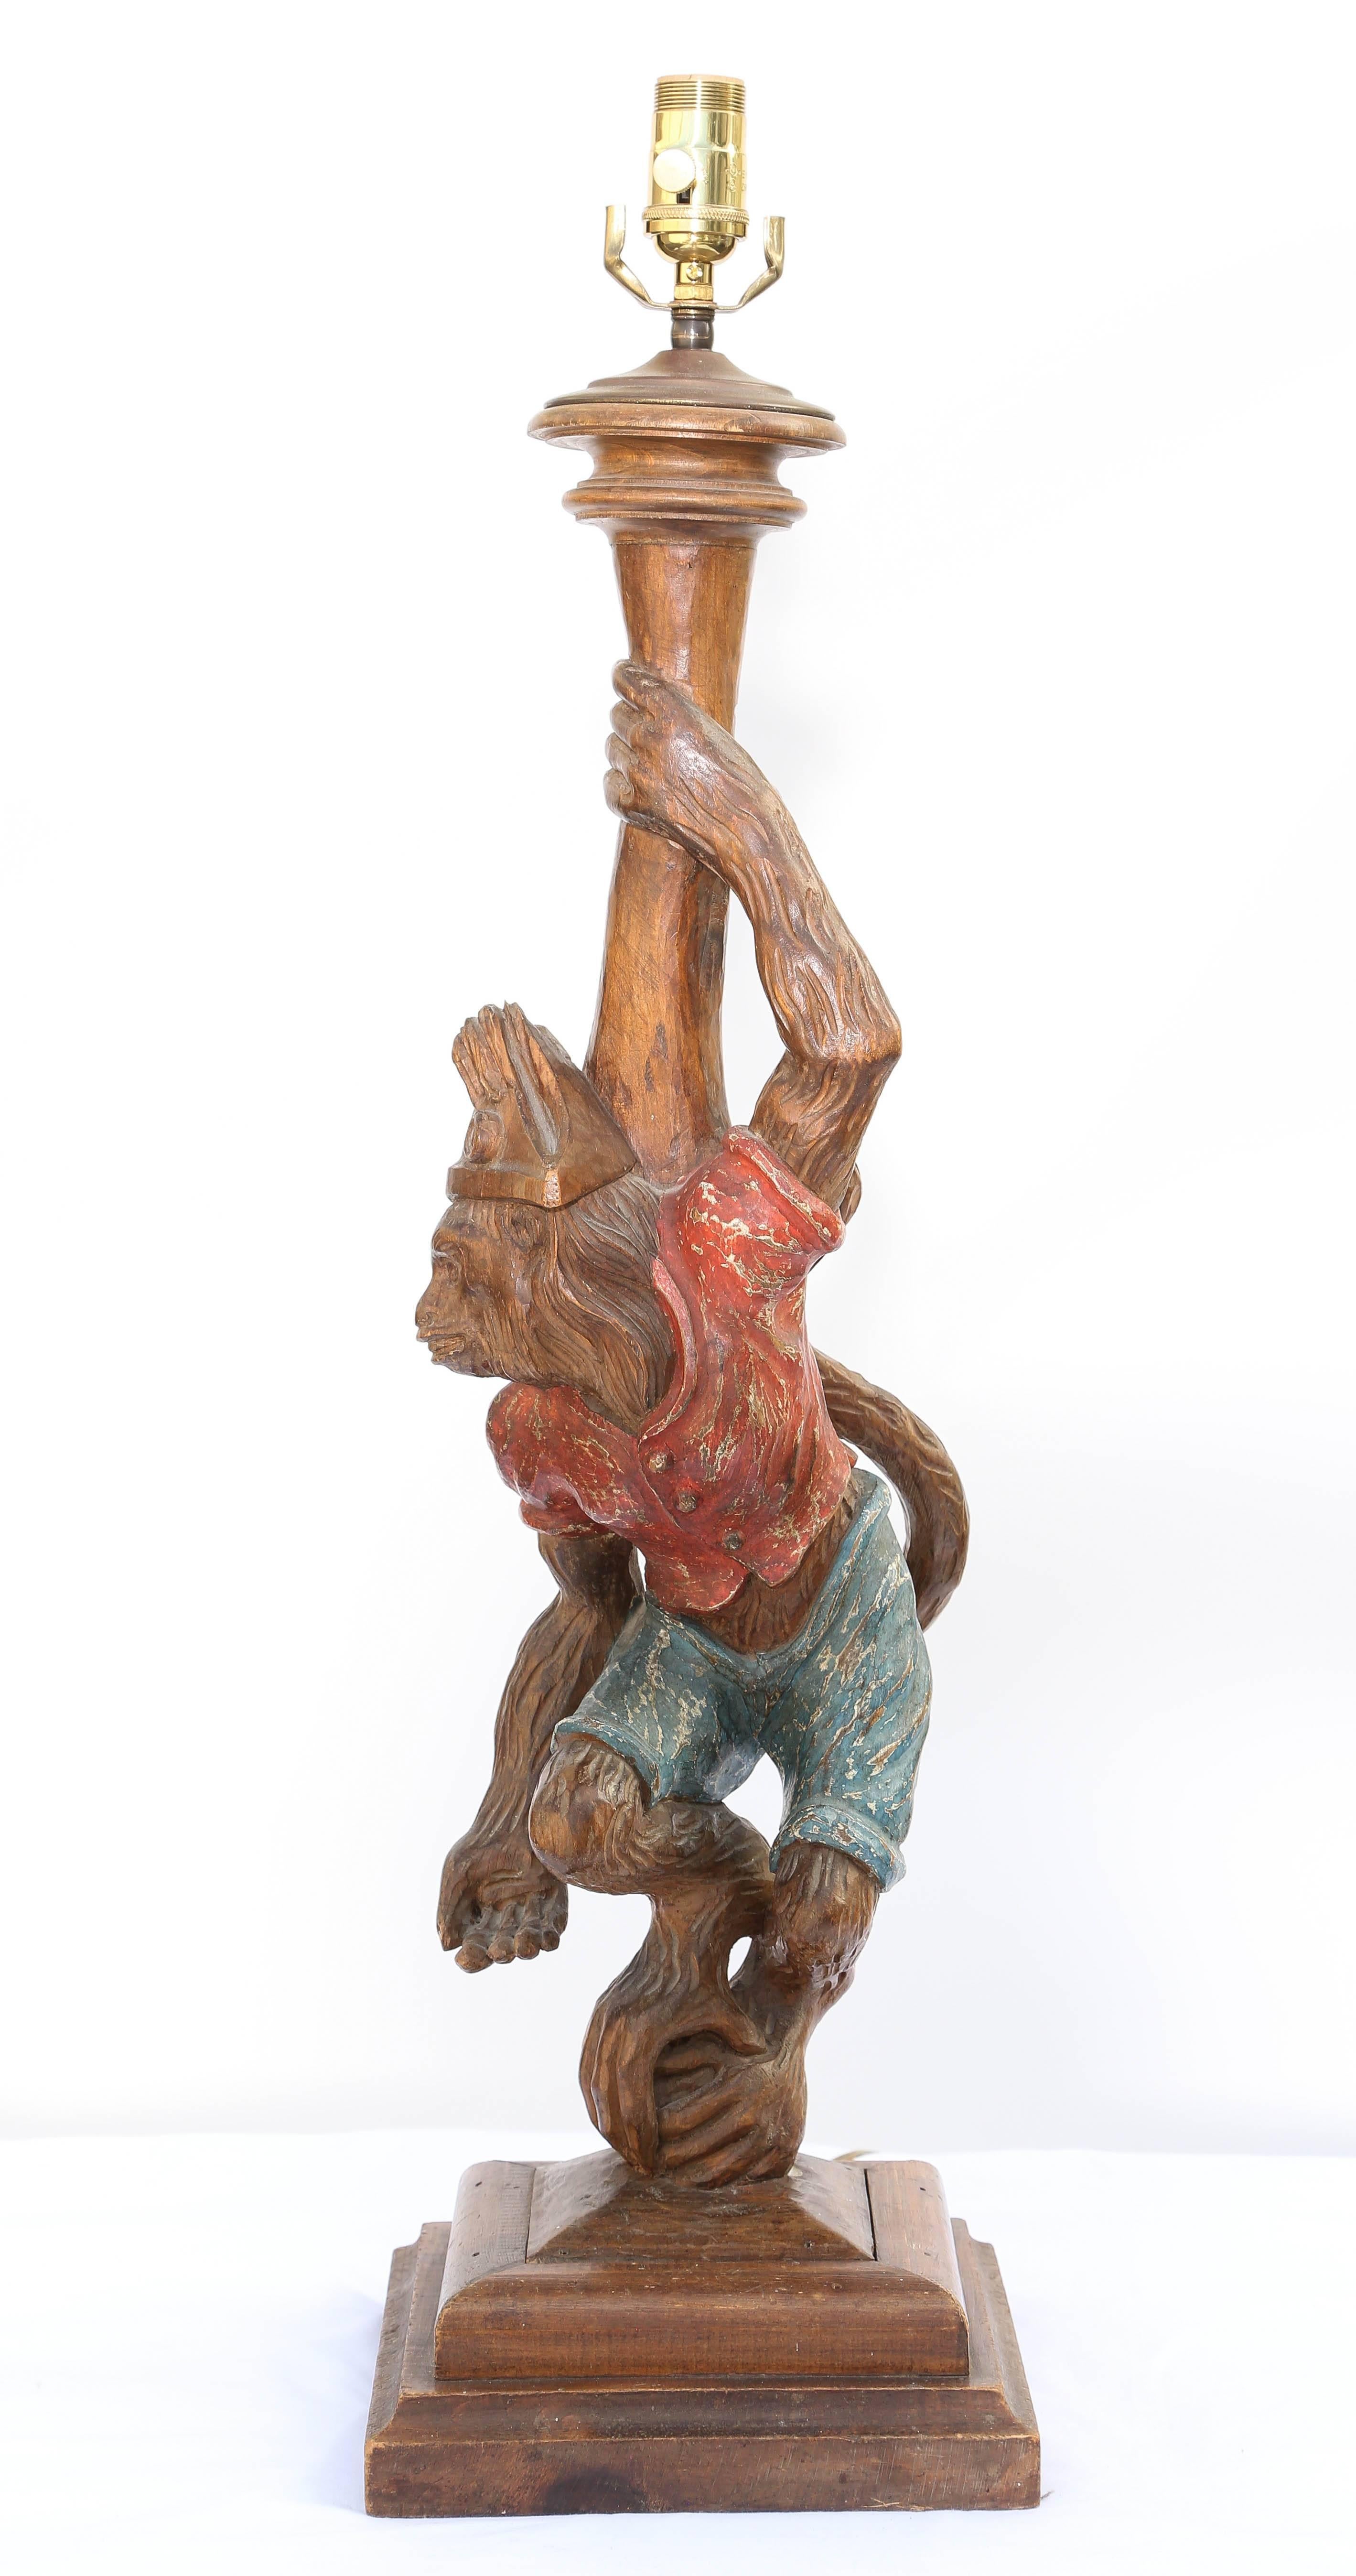 Single lamp, of carved wood, carved as a monkey in pirate dress, on square base.

Stock ID: D5281